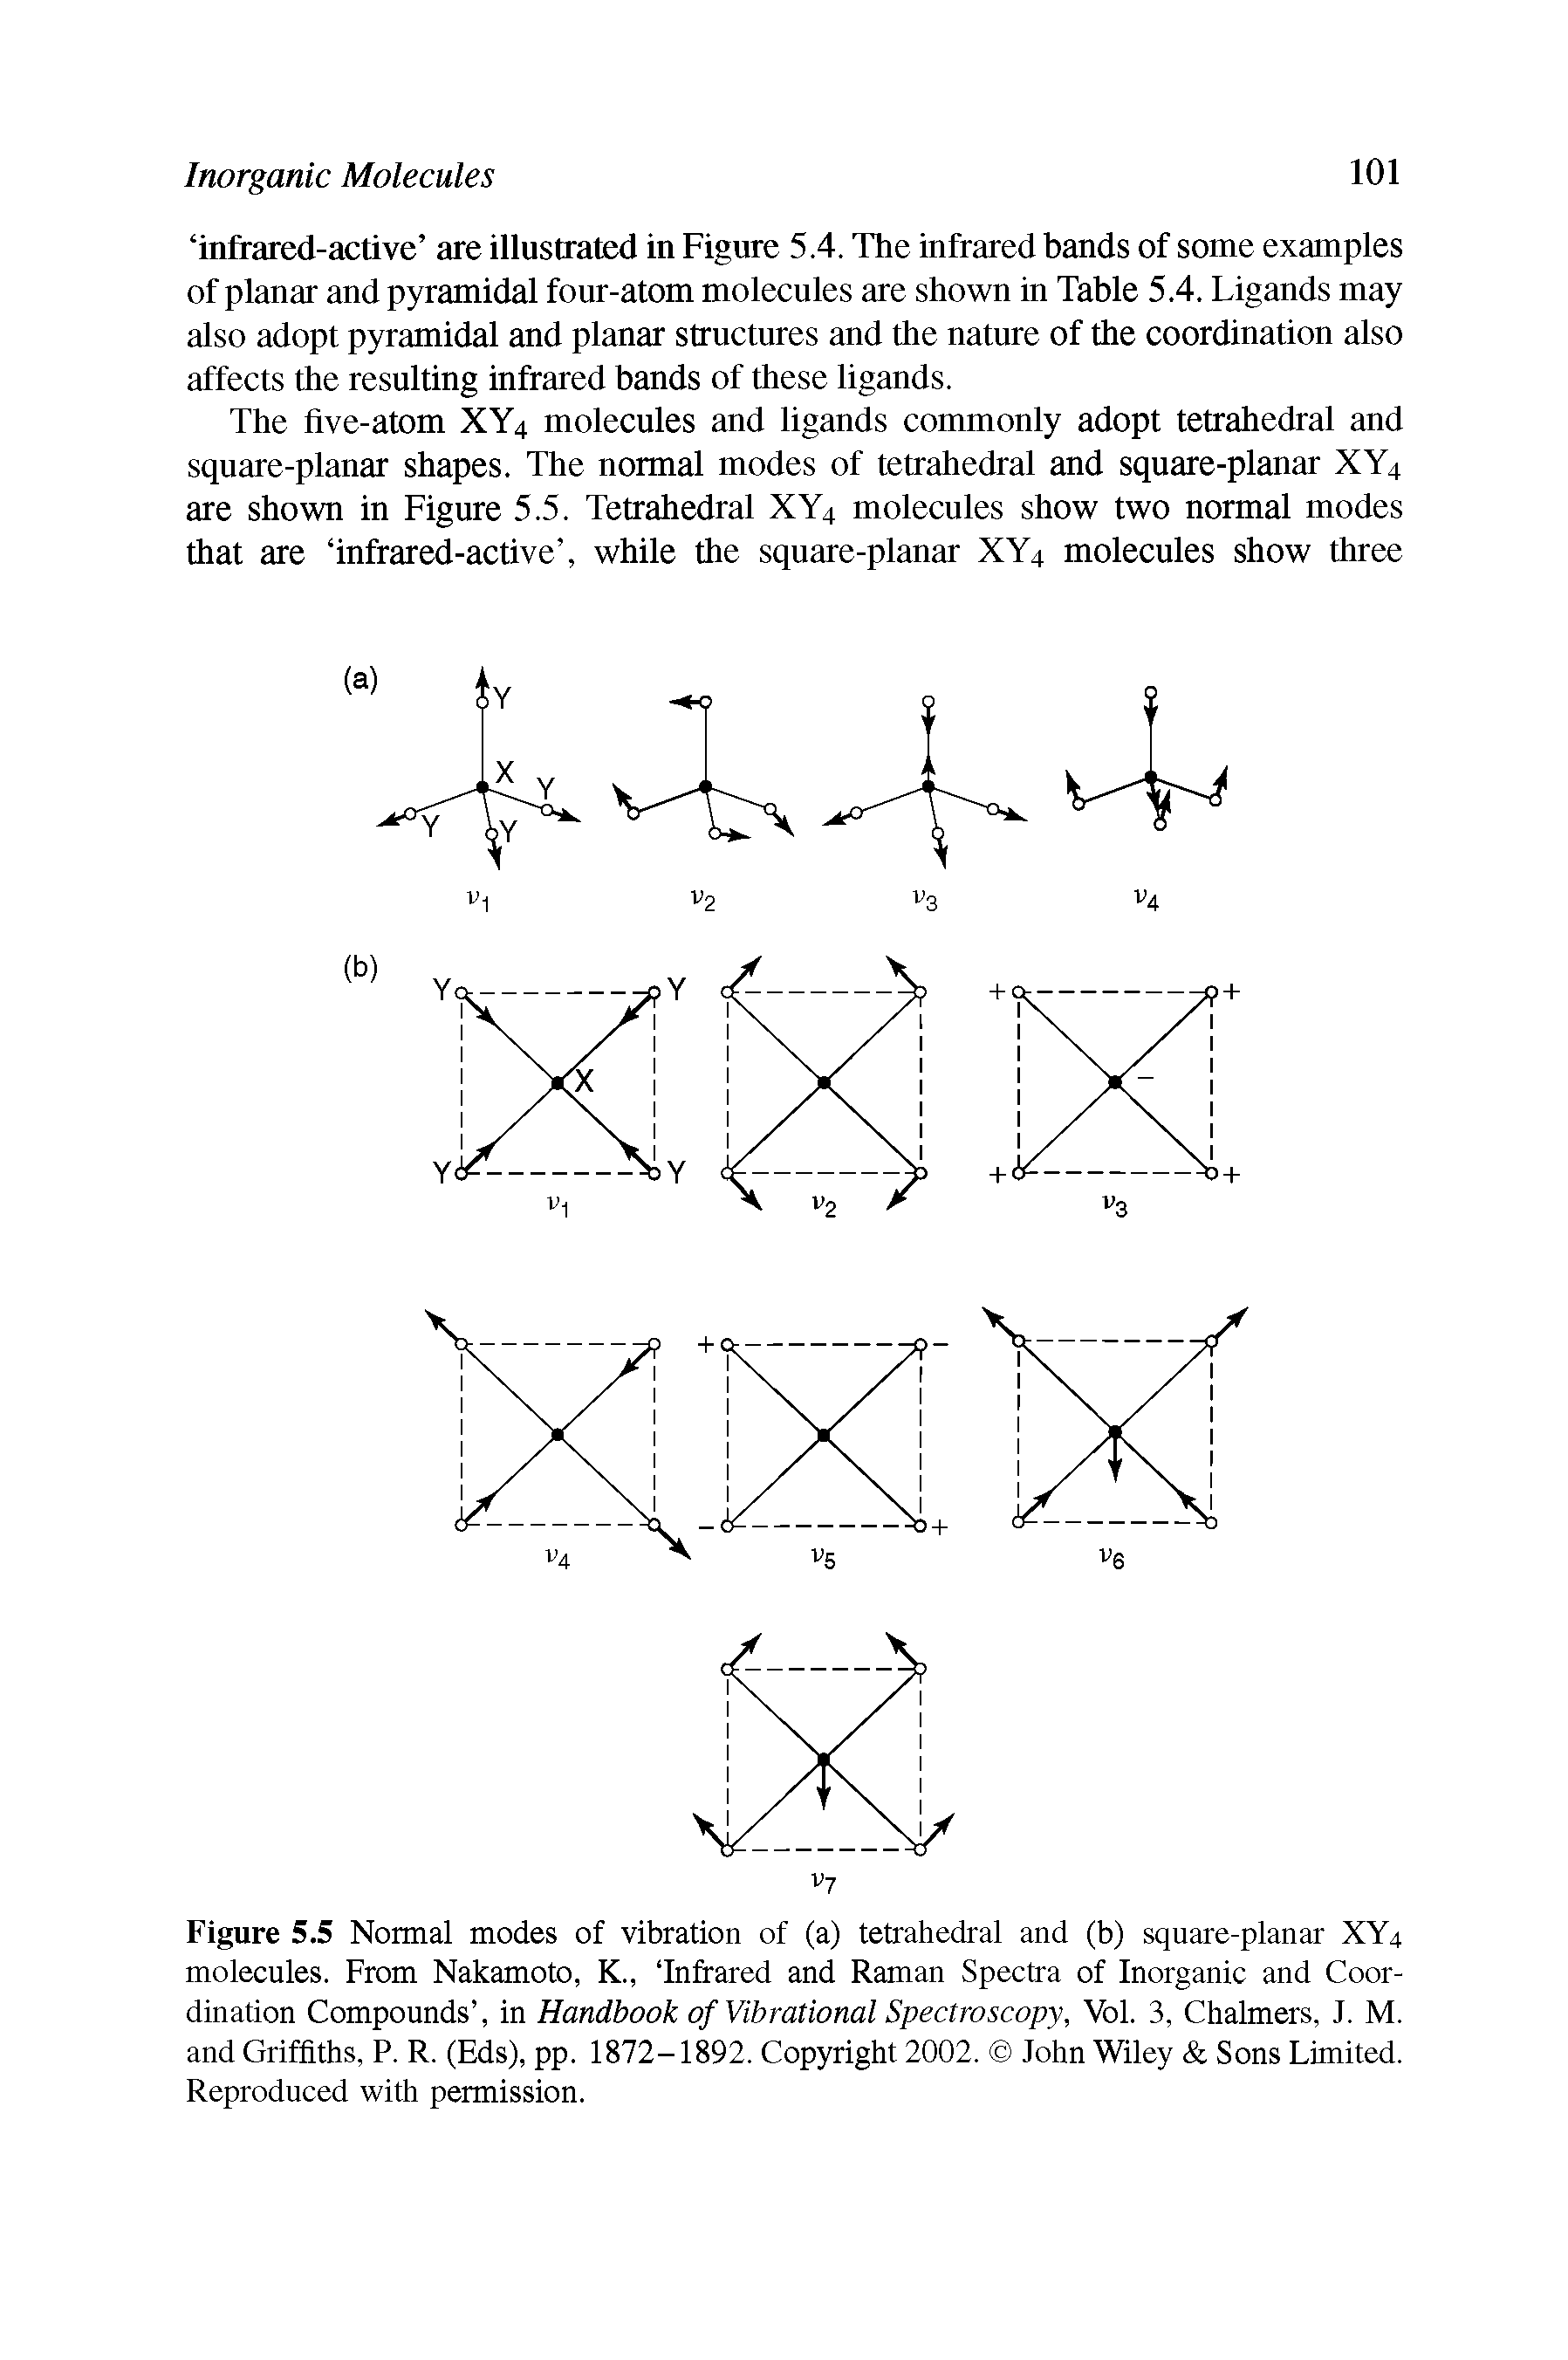 Figure 5.5 Normal modes of vibration of (a) tetrahedral and (b) square-planar XY4 molecules. From Nakamoto, K., Infrared and Raman Spectra of Inorganic and Coordination Compounds , in Handbook of Vibrational Spectroscopy, Vol. 3, Chalmers, J. M. and Griffiths, P. R. (Eds), pp. 1872-1892. Cop)uight 2002. John " Afiley Sons Limited. Reproduced with permission.